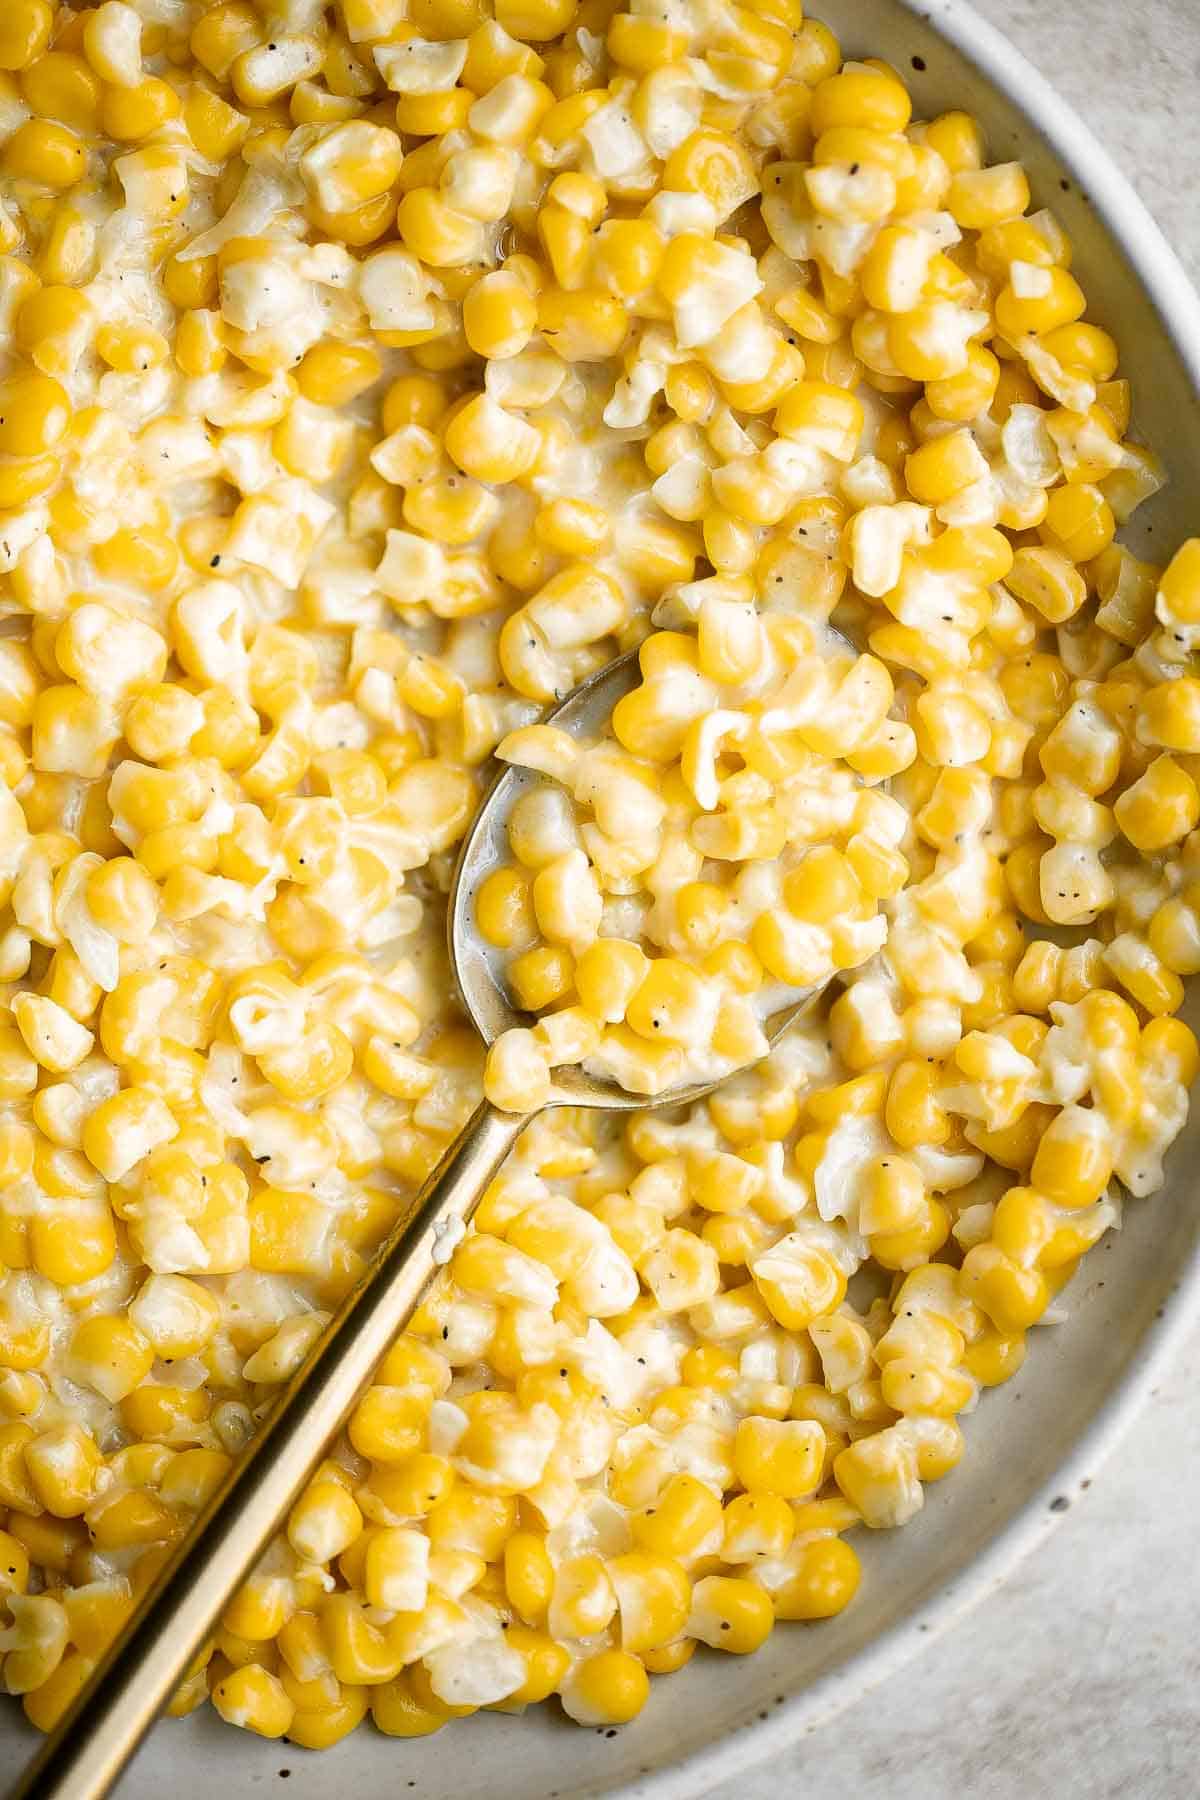 Homemade Creamed Corn is creamy, delicious, and simple. It’s quick and easy to make at home and so much better than store-bought canned creamed corn. | aheadofthyme.com